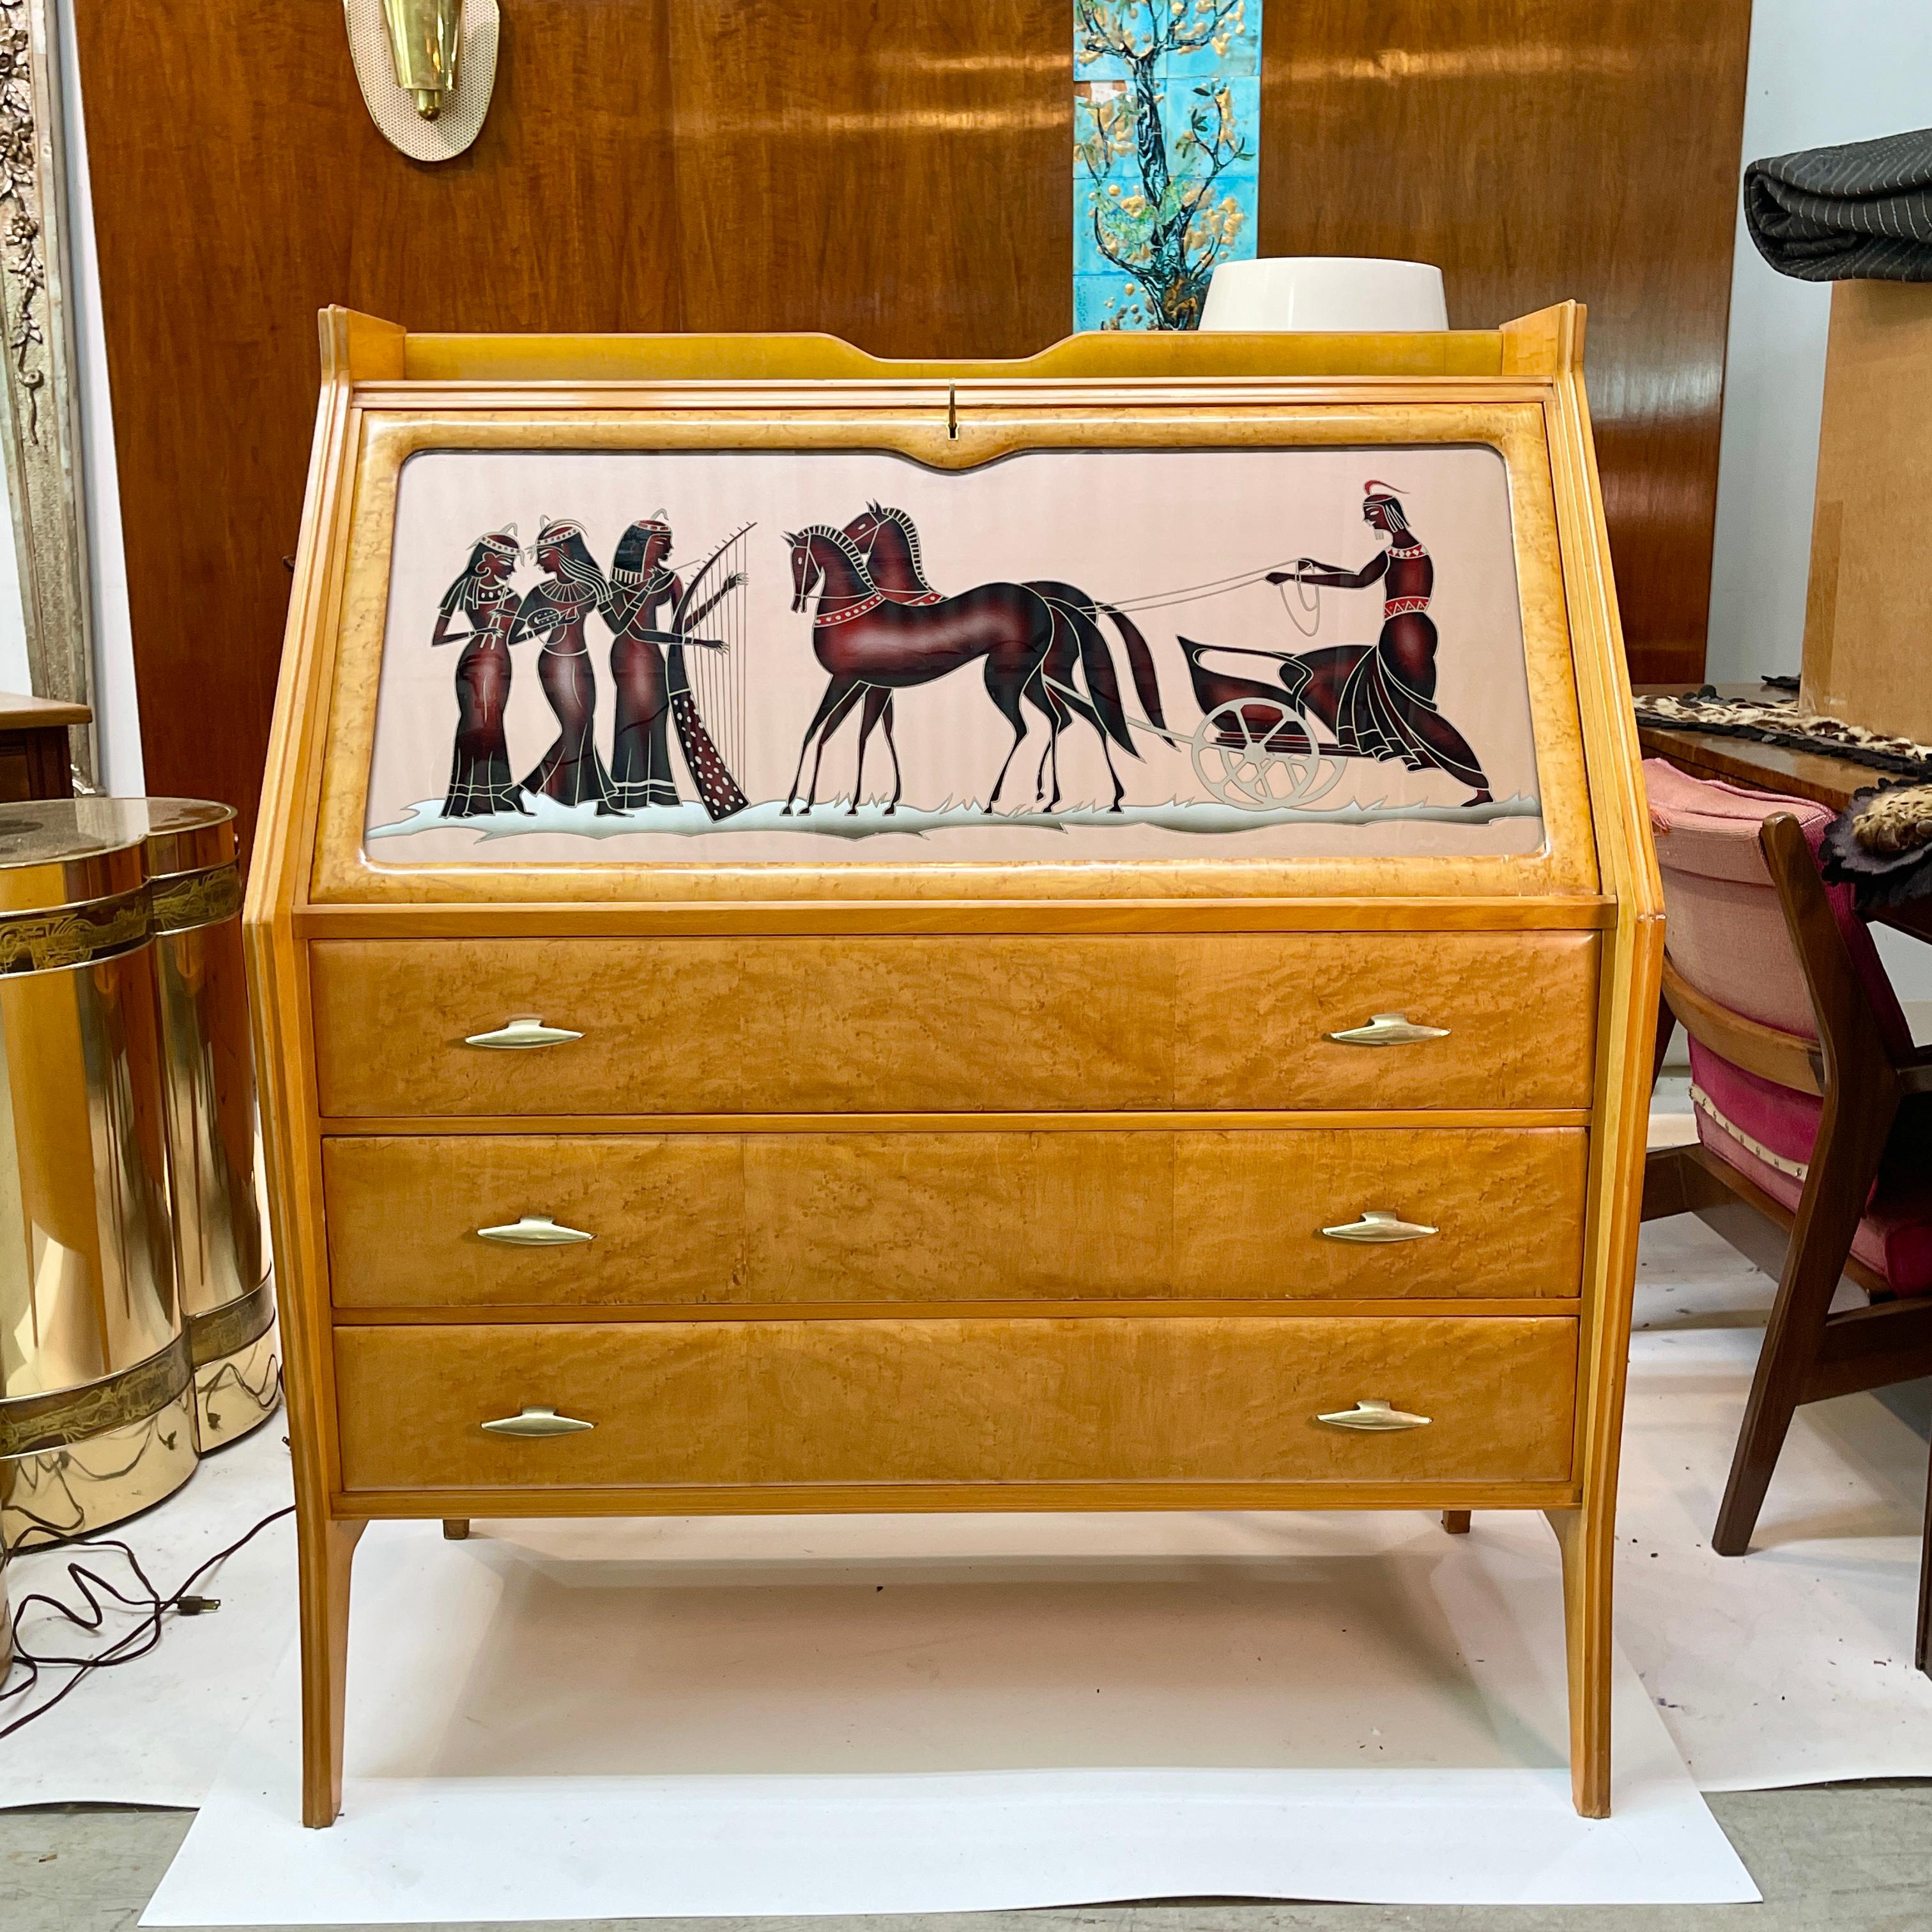 Golden birch veneered drop front secretary desk with three drawers and reverse painted glass panel of stylized Egyptian women and a charioteer similar to a design by Osvaldo Borsani (see last image)
Interior fitted with three small drawers and